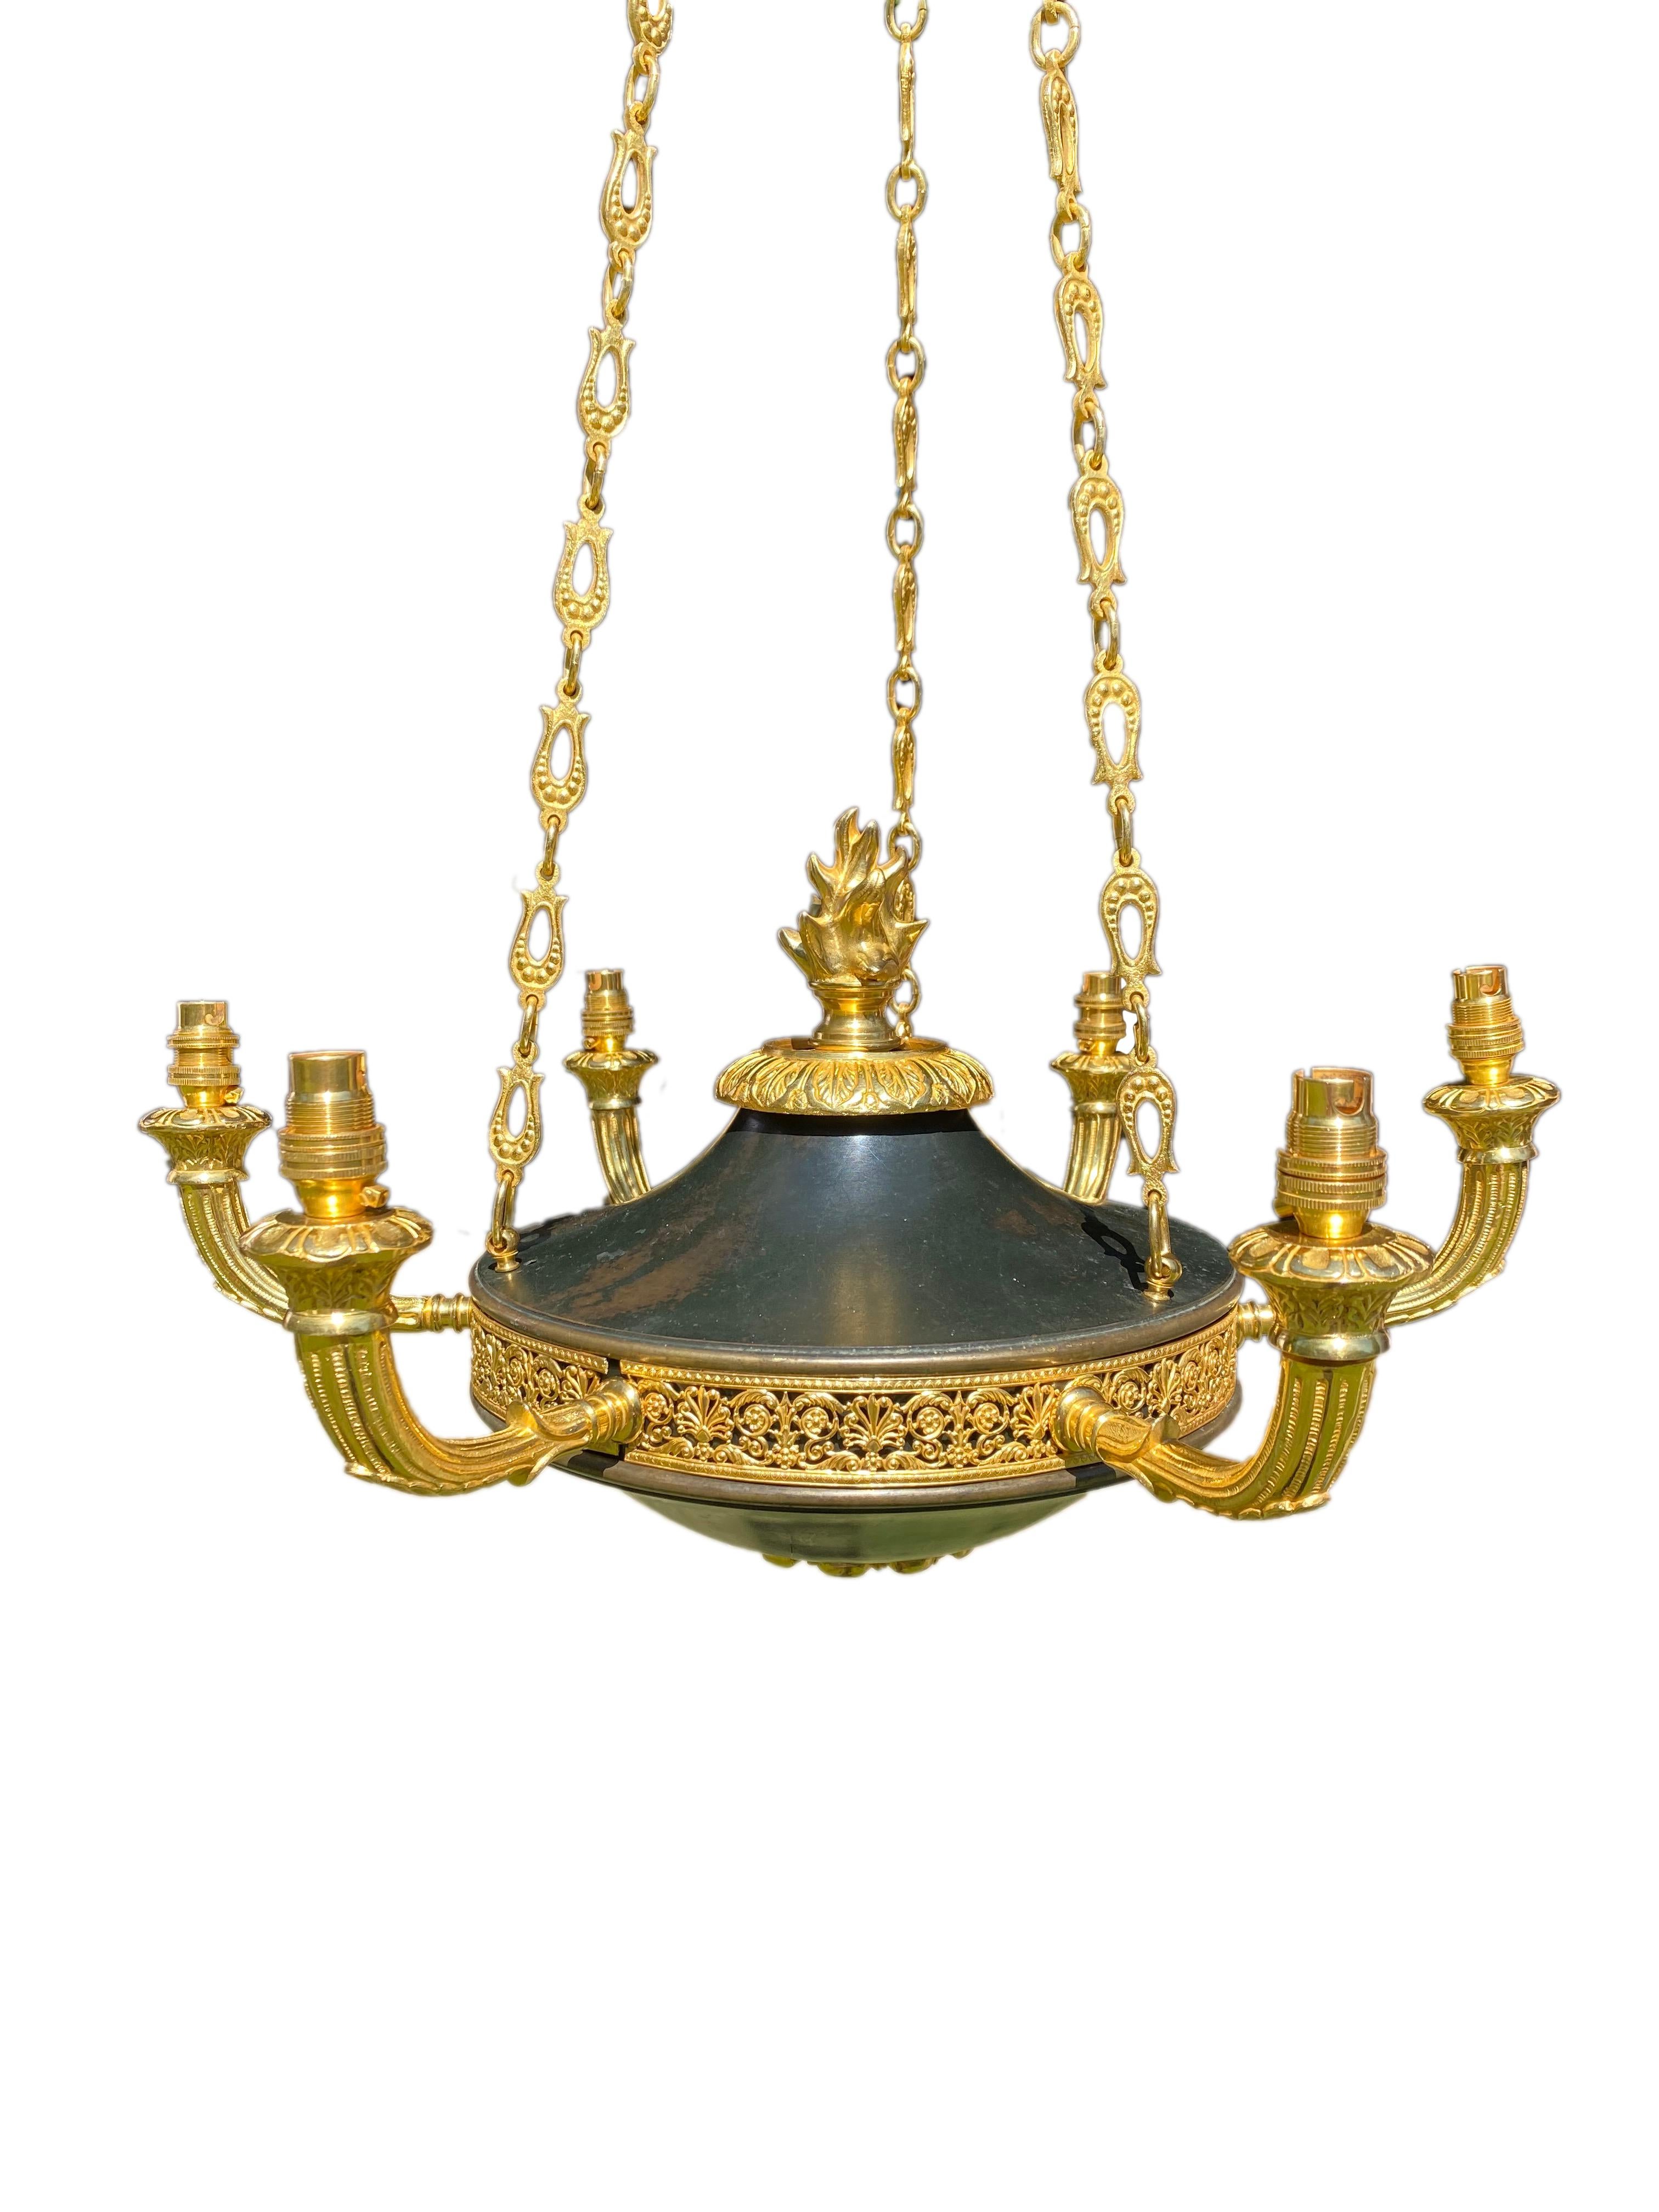 19th Century French Empire Chandelier For Sale 2